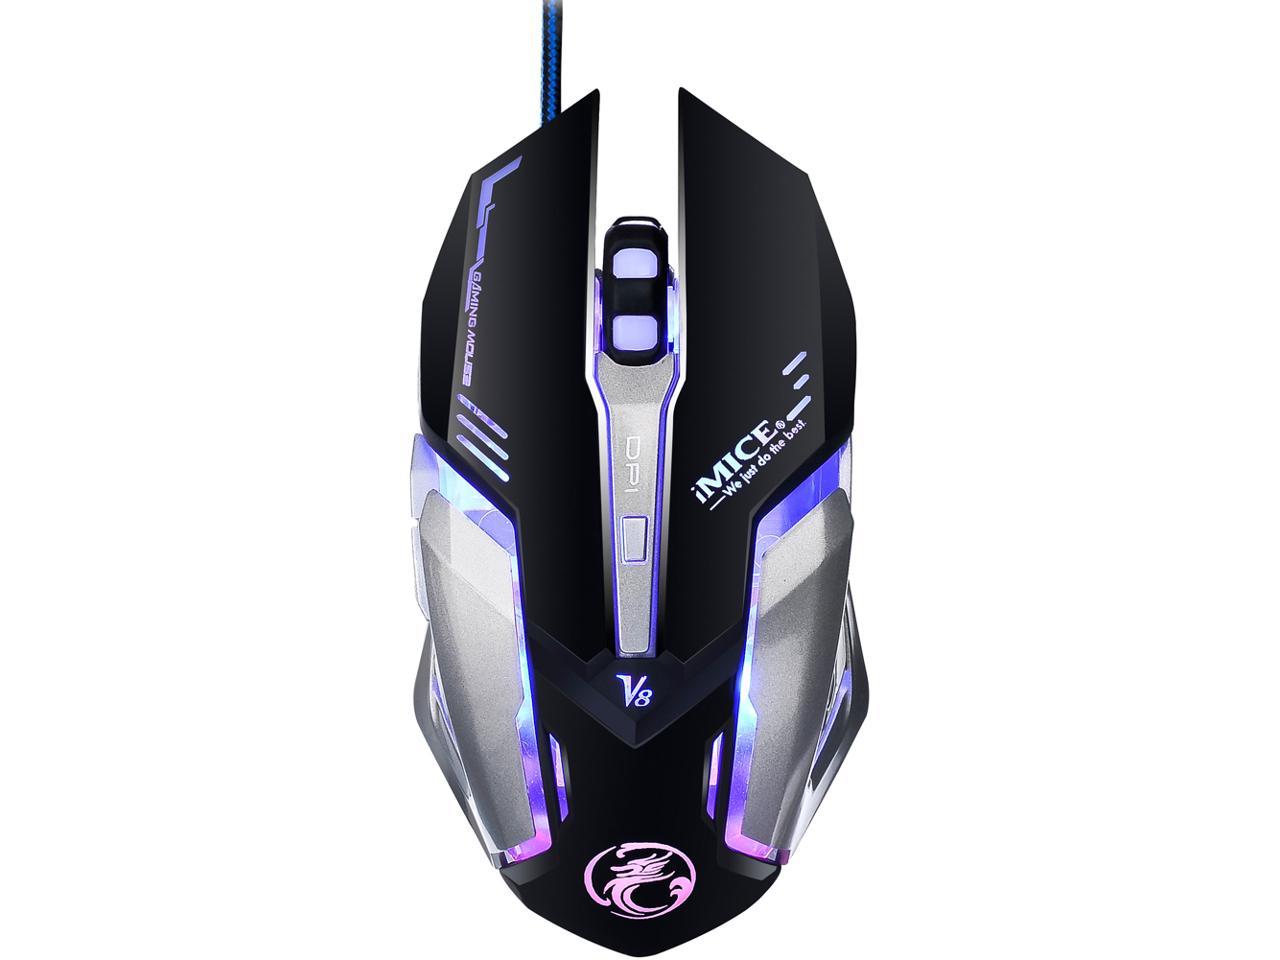 4000DPI Optical USB Wired Gaming Mouse 11 Programmable Button Mice For Pro Gamer 